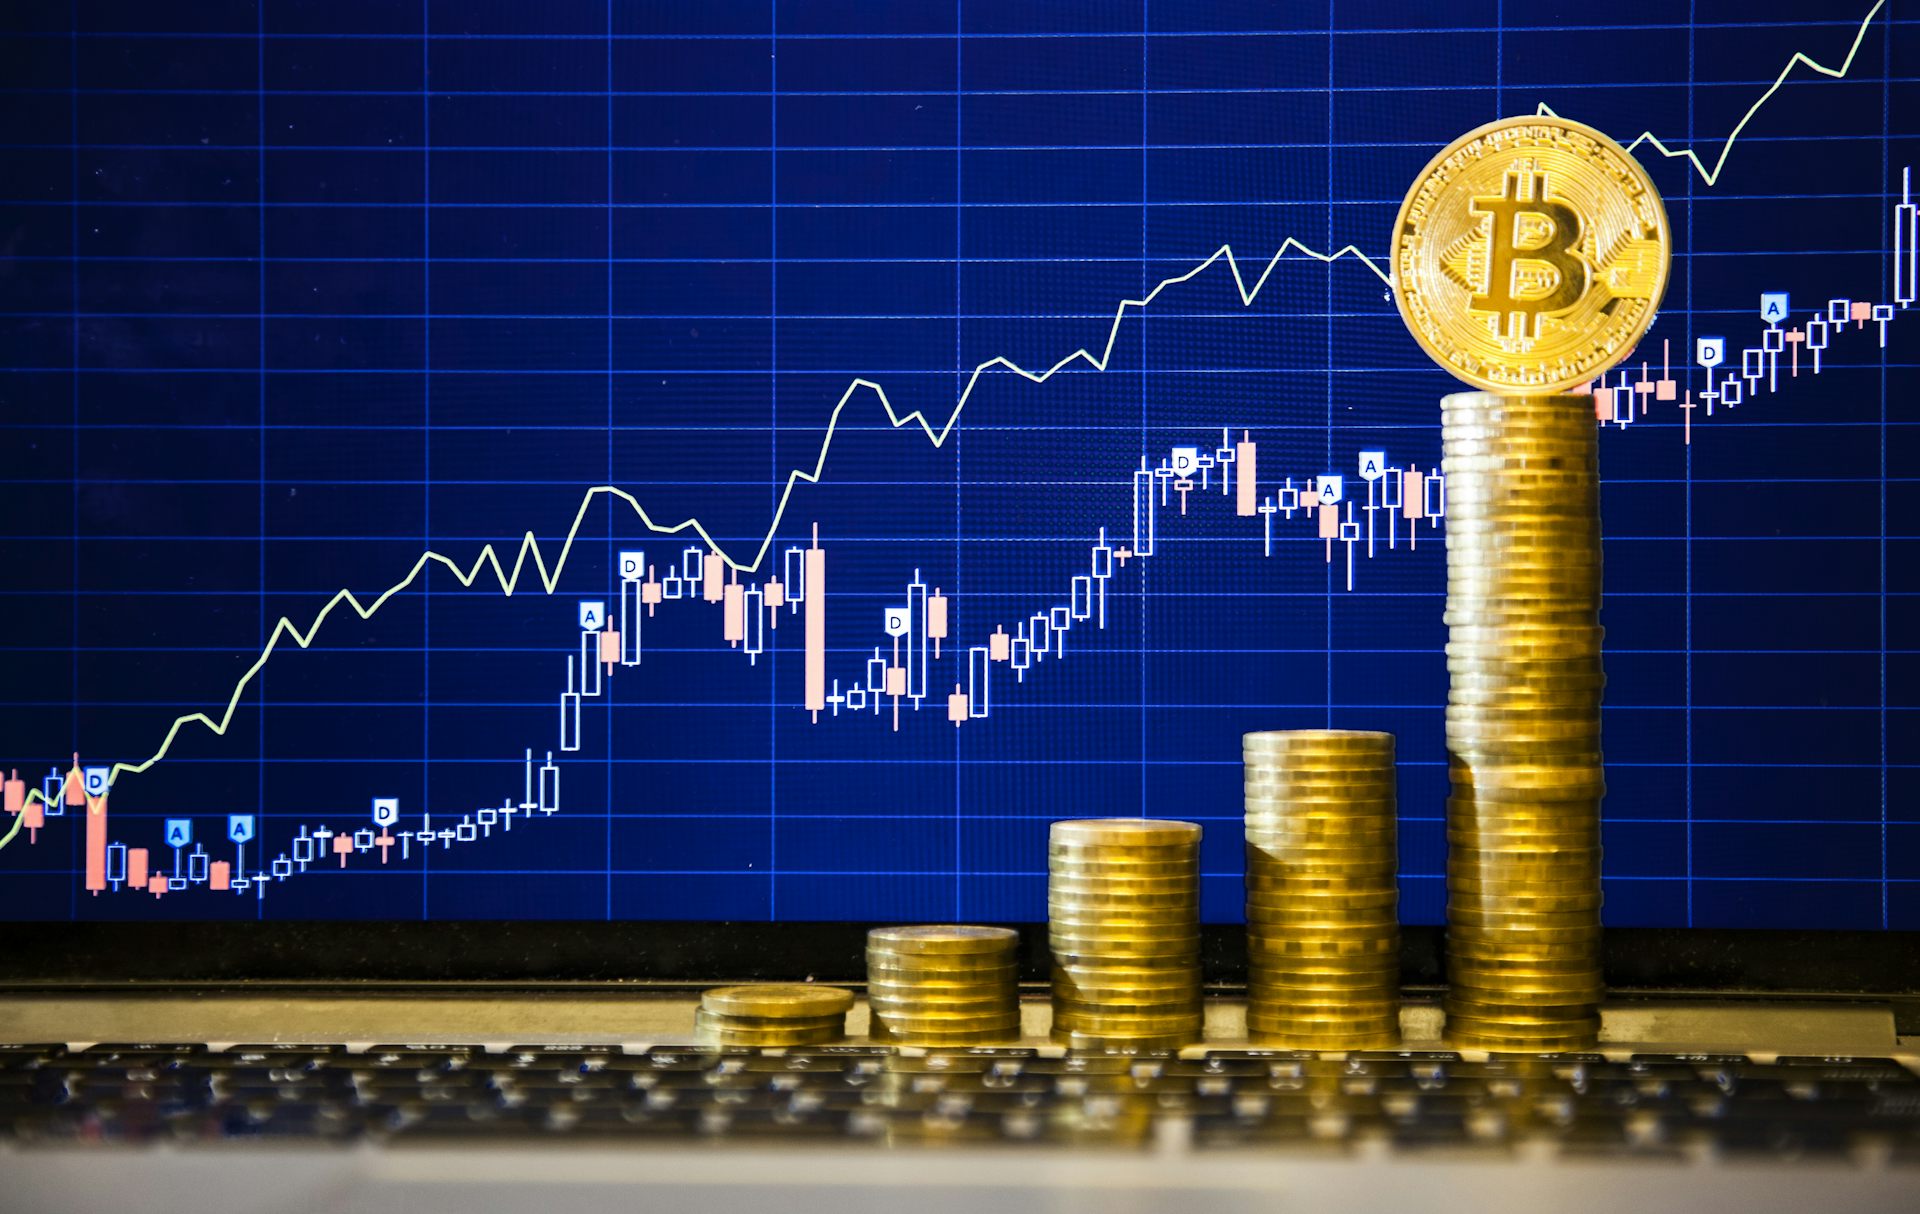 How to Value Bitcoin and Other Cryptocurrencies - Lyn Alden